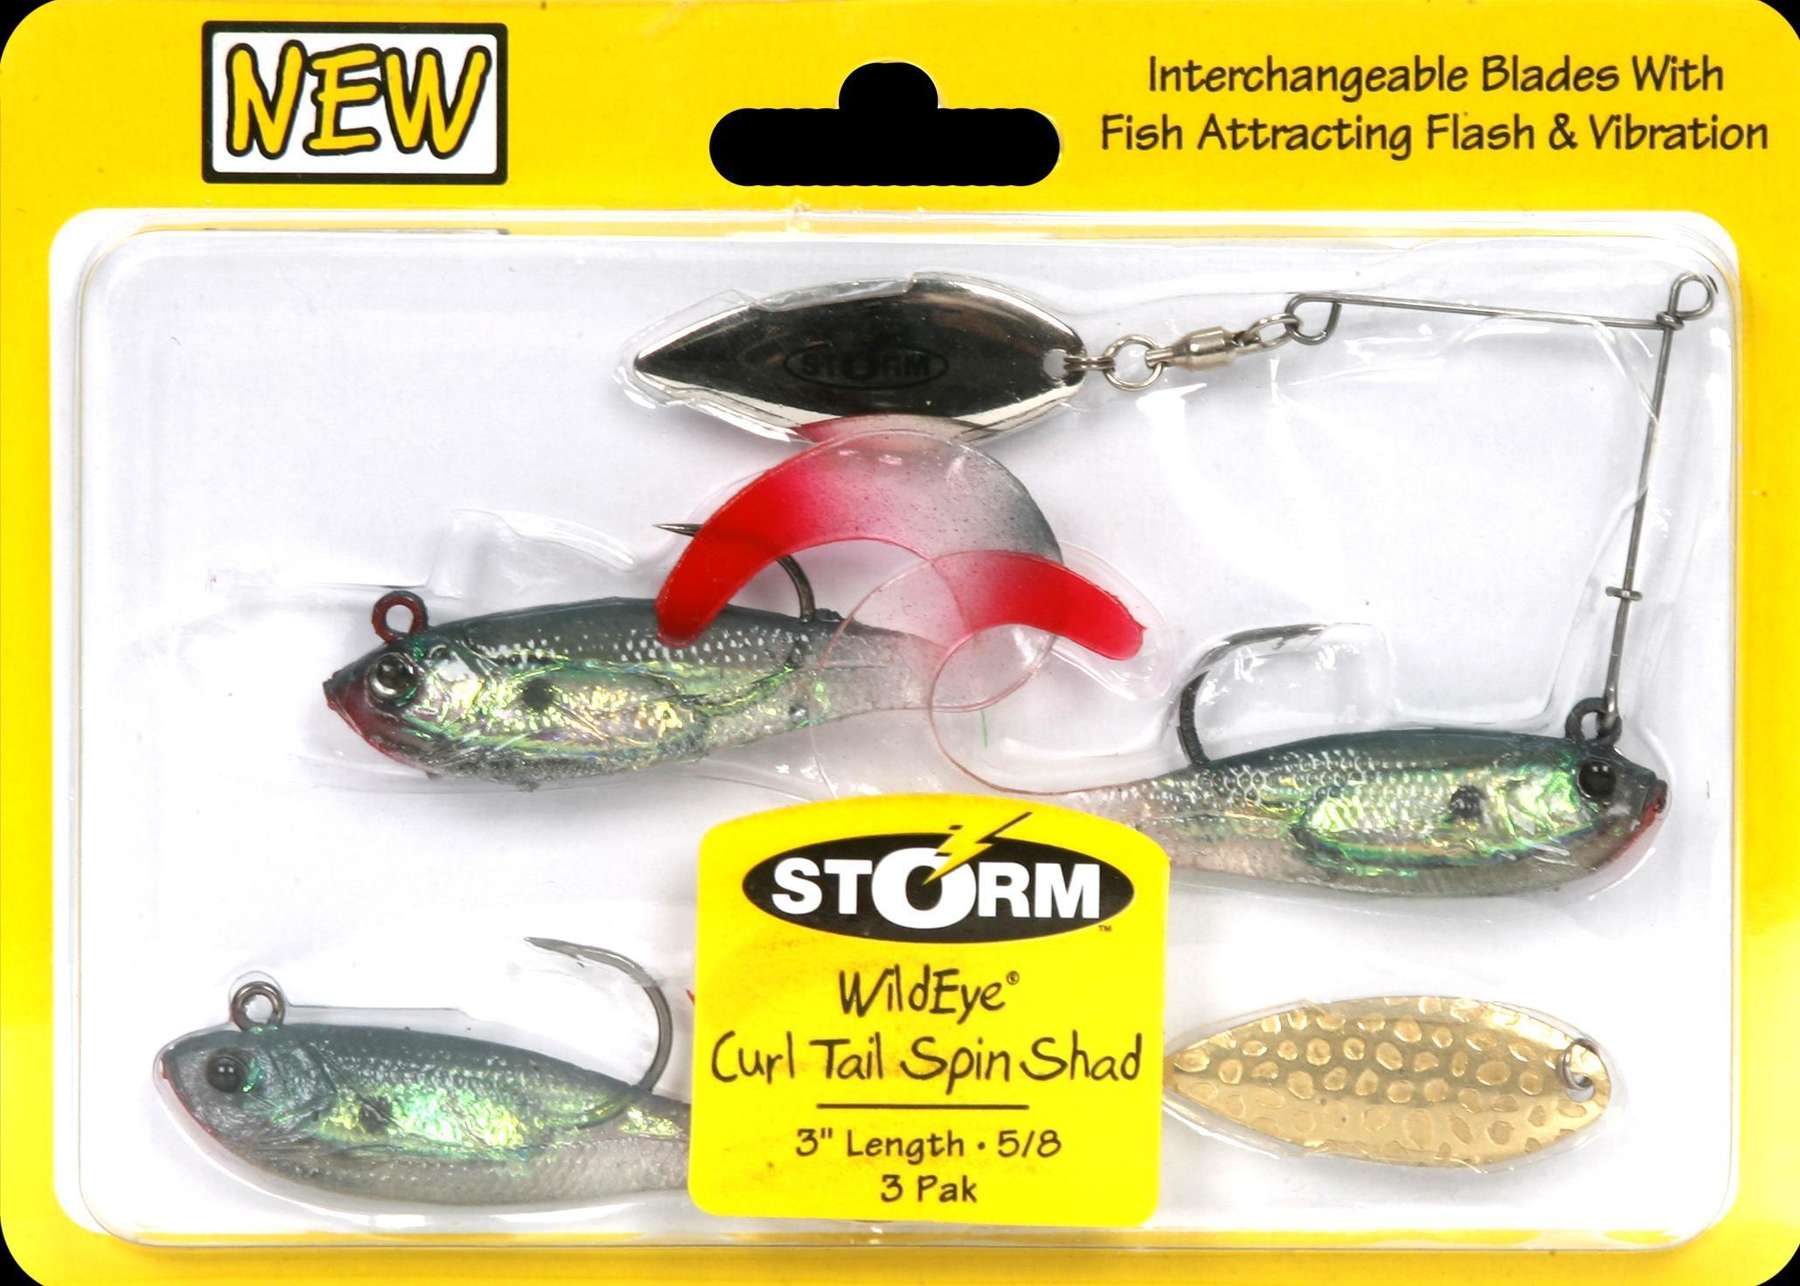 https://www.outdoorshopping.com/pimages/3-pack-storm-wildeye-3-inch-curl-tail-swim-shad-lures-shad-curltail-spin-03-shad-130994574065651962.jpg